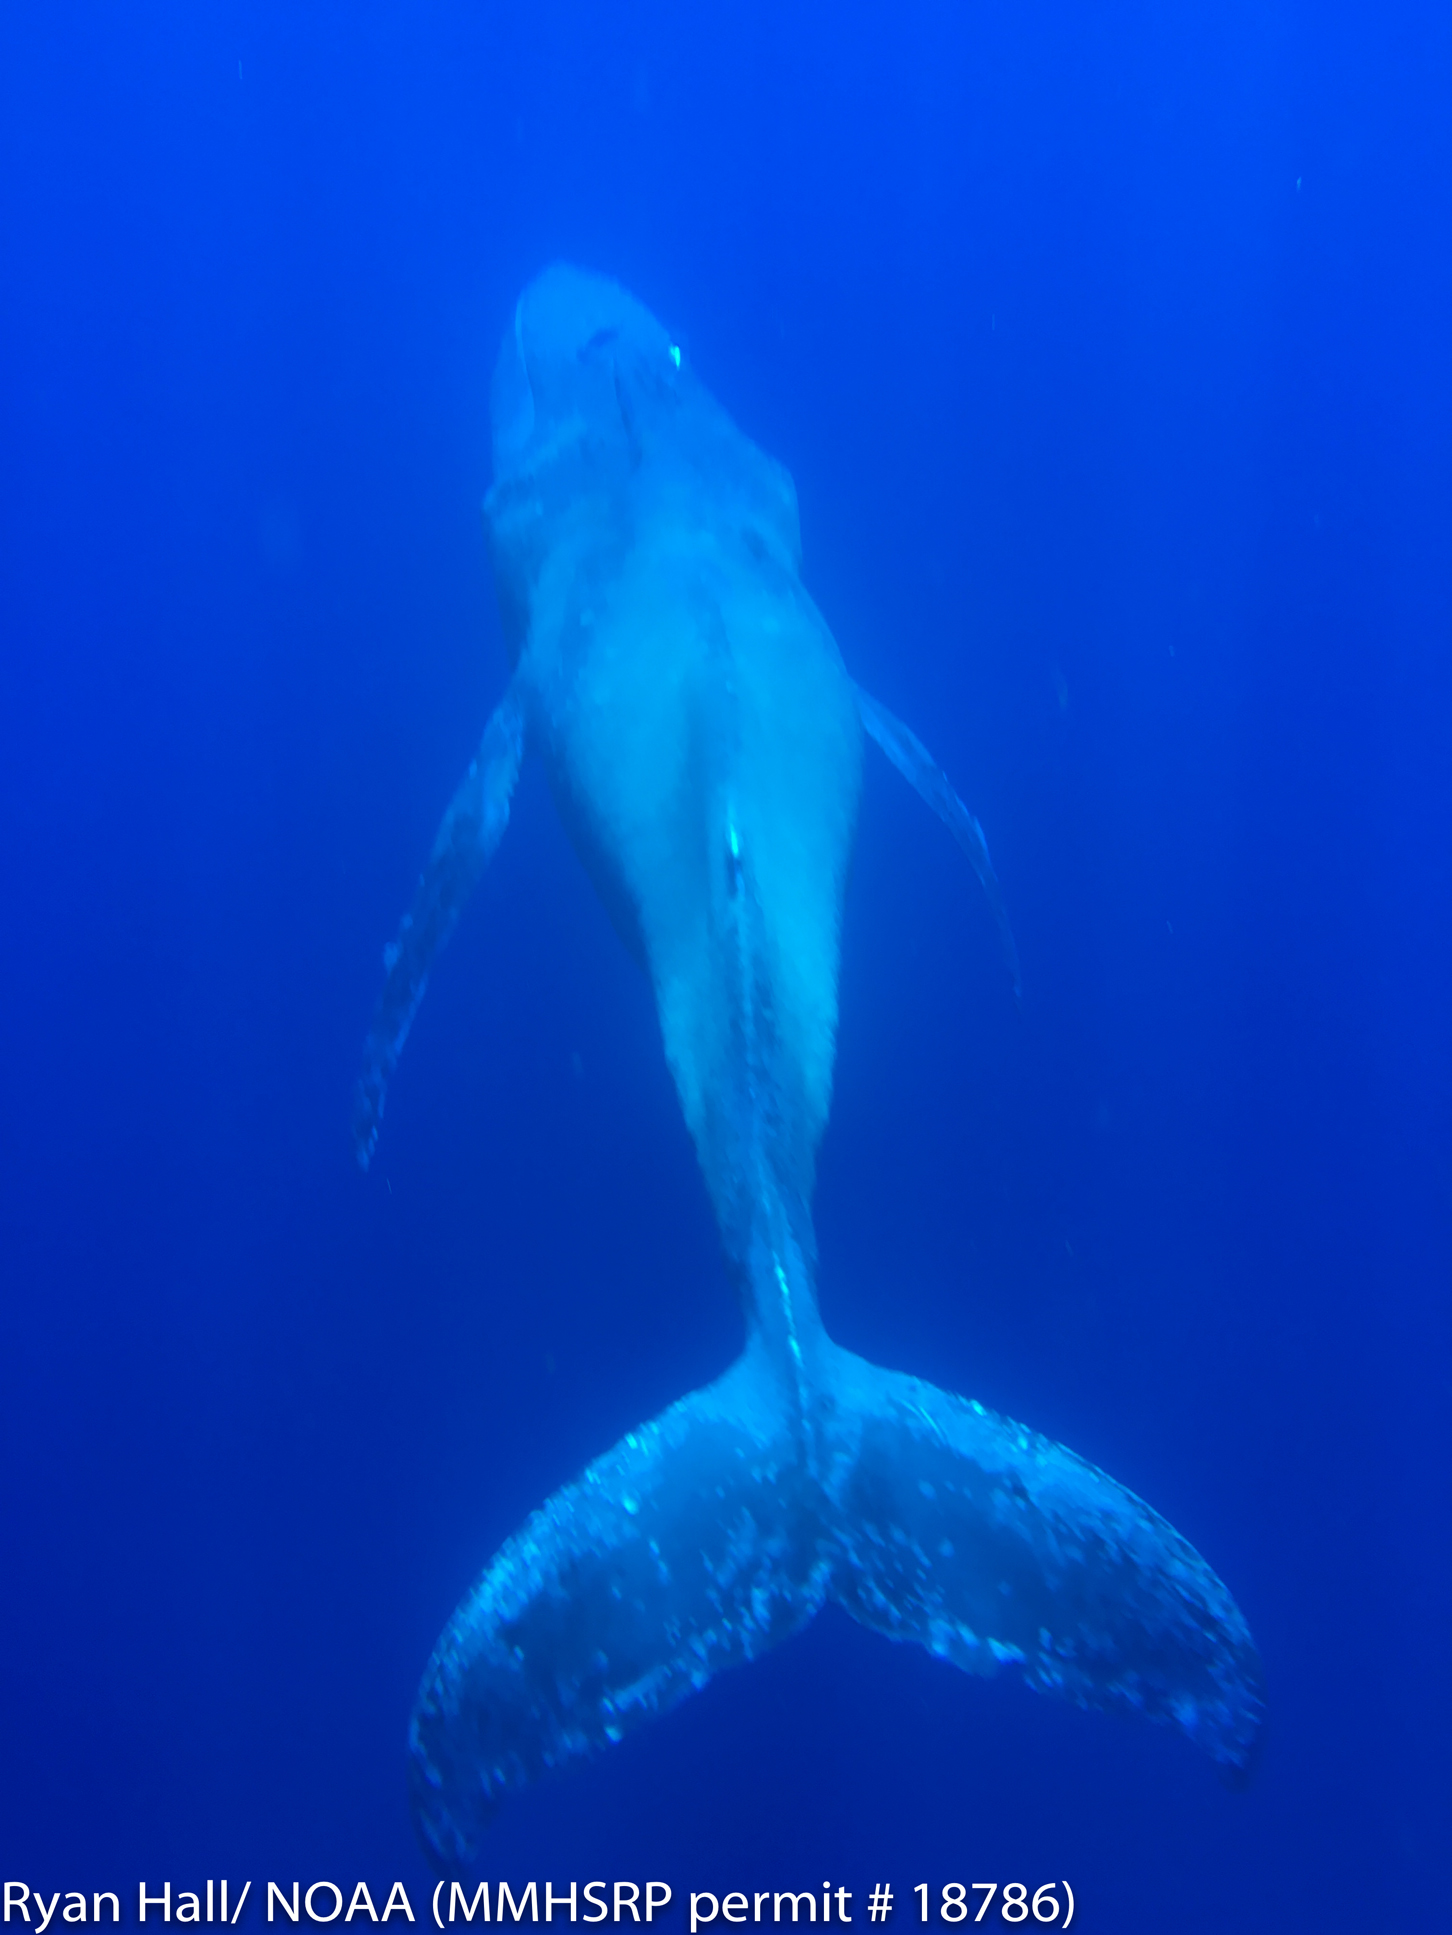 This image provided by NOAA shows a humpback whale sighted off Maui, Hawaii. Hawaiian Islands Humpback Whale National Marine Sanctuary Superintendent Malia Chow said Friday, Aug. 26, 2016, that the animal is emaciated and covered in whale lice. At least four sharks were following the whale. She says these are all indicators of a whale in distress.